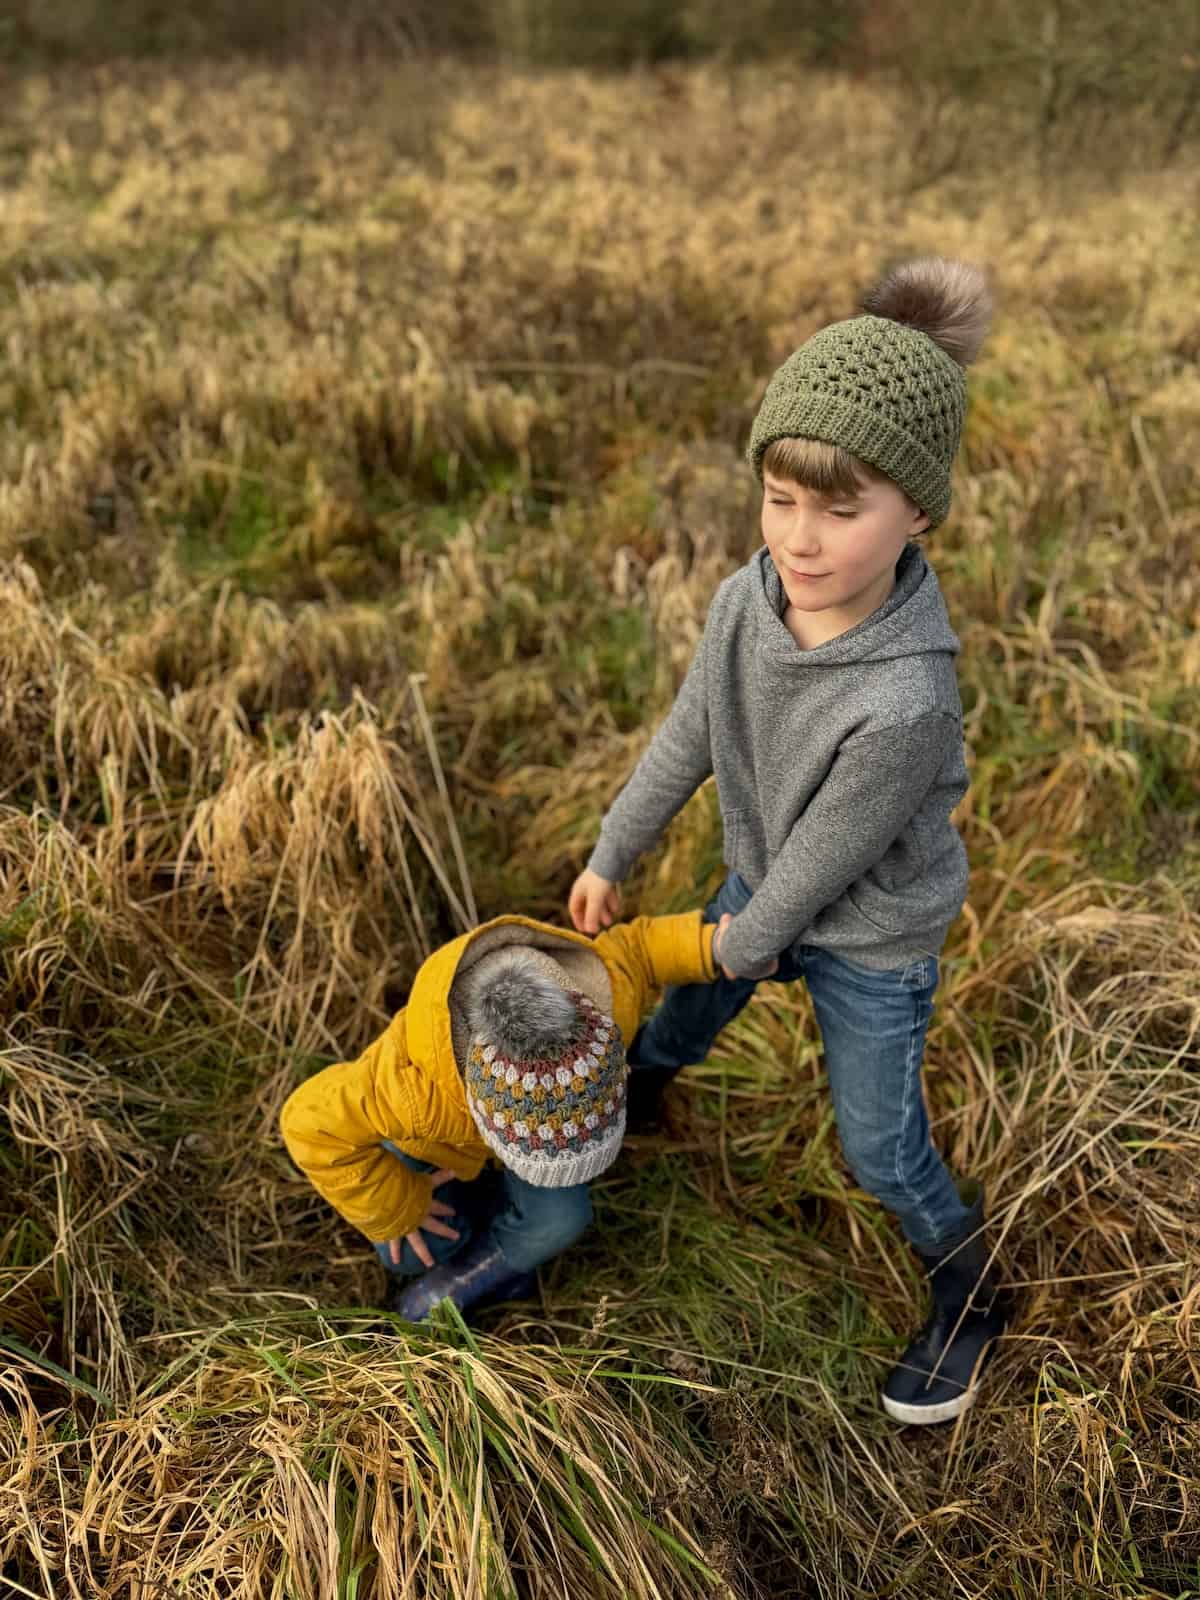 Two children playing in a field of tall grass.